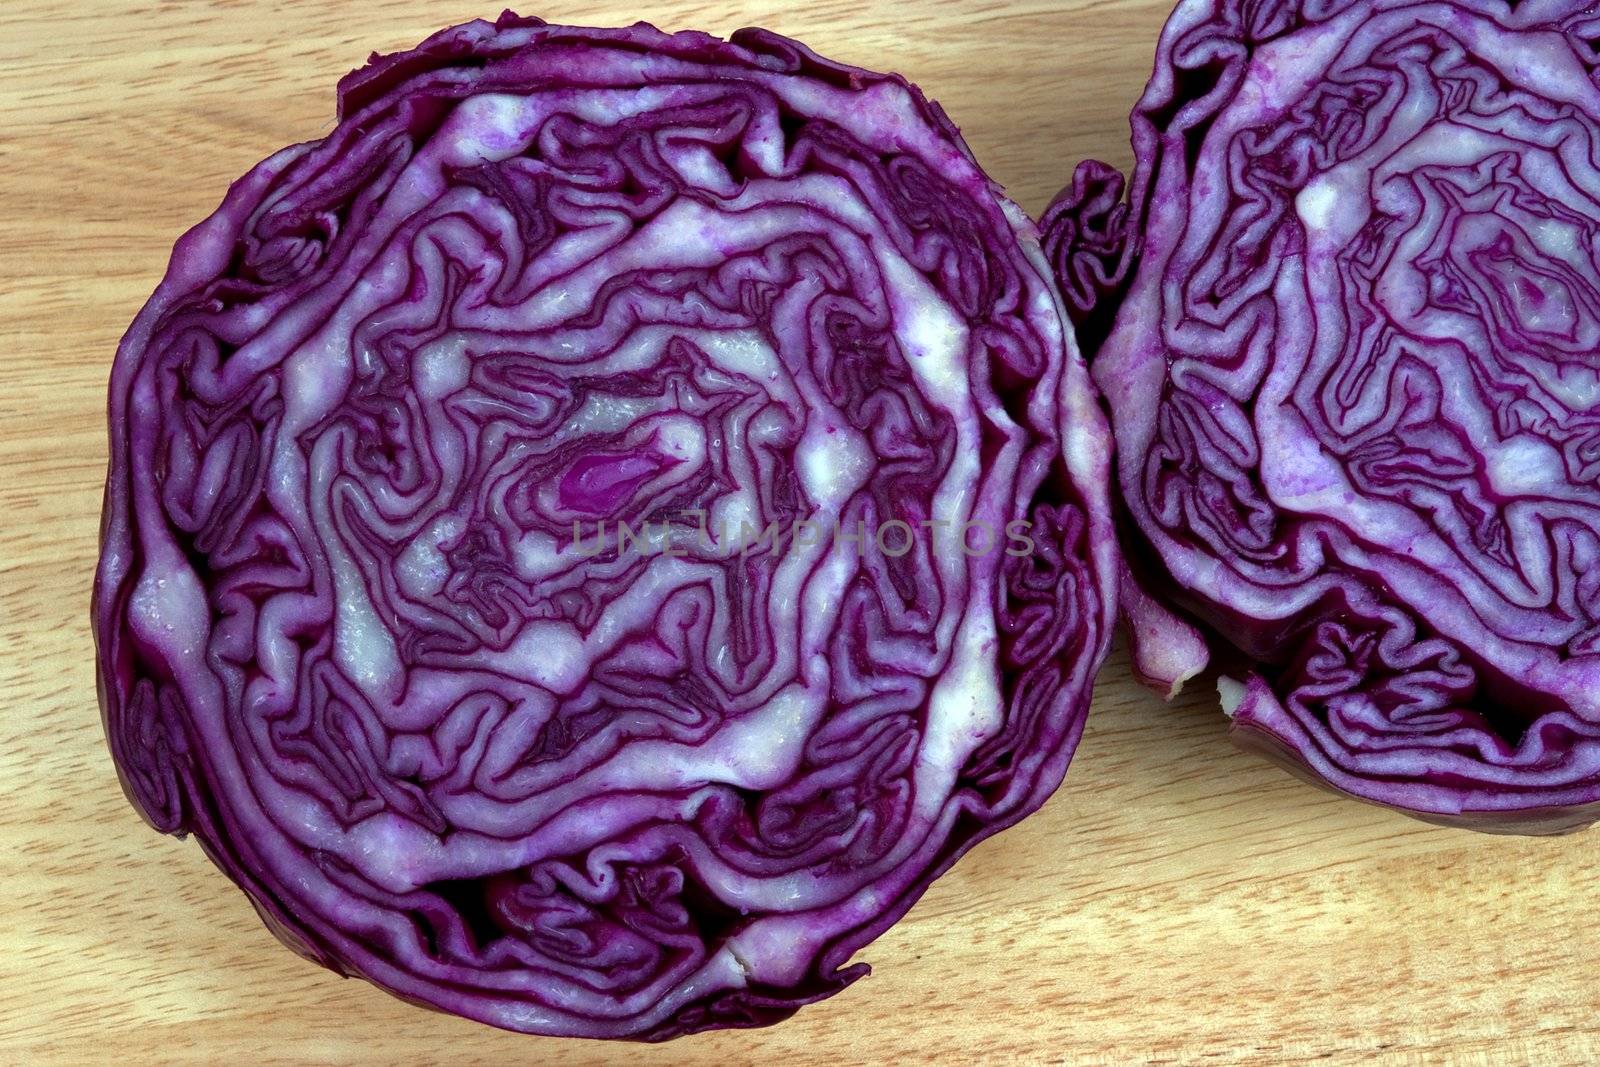 Red cabbage cut in half showing the growth pattern